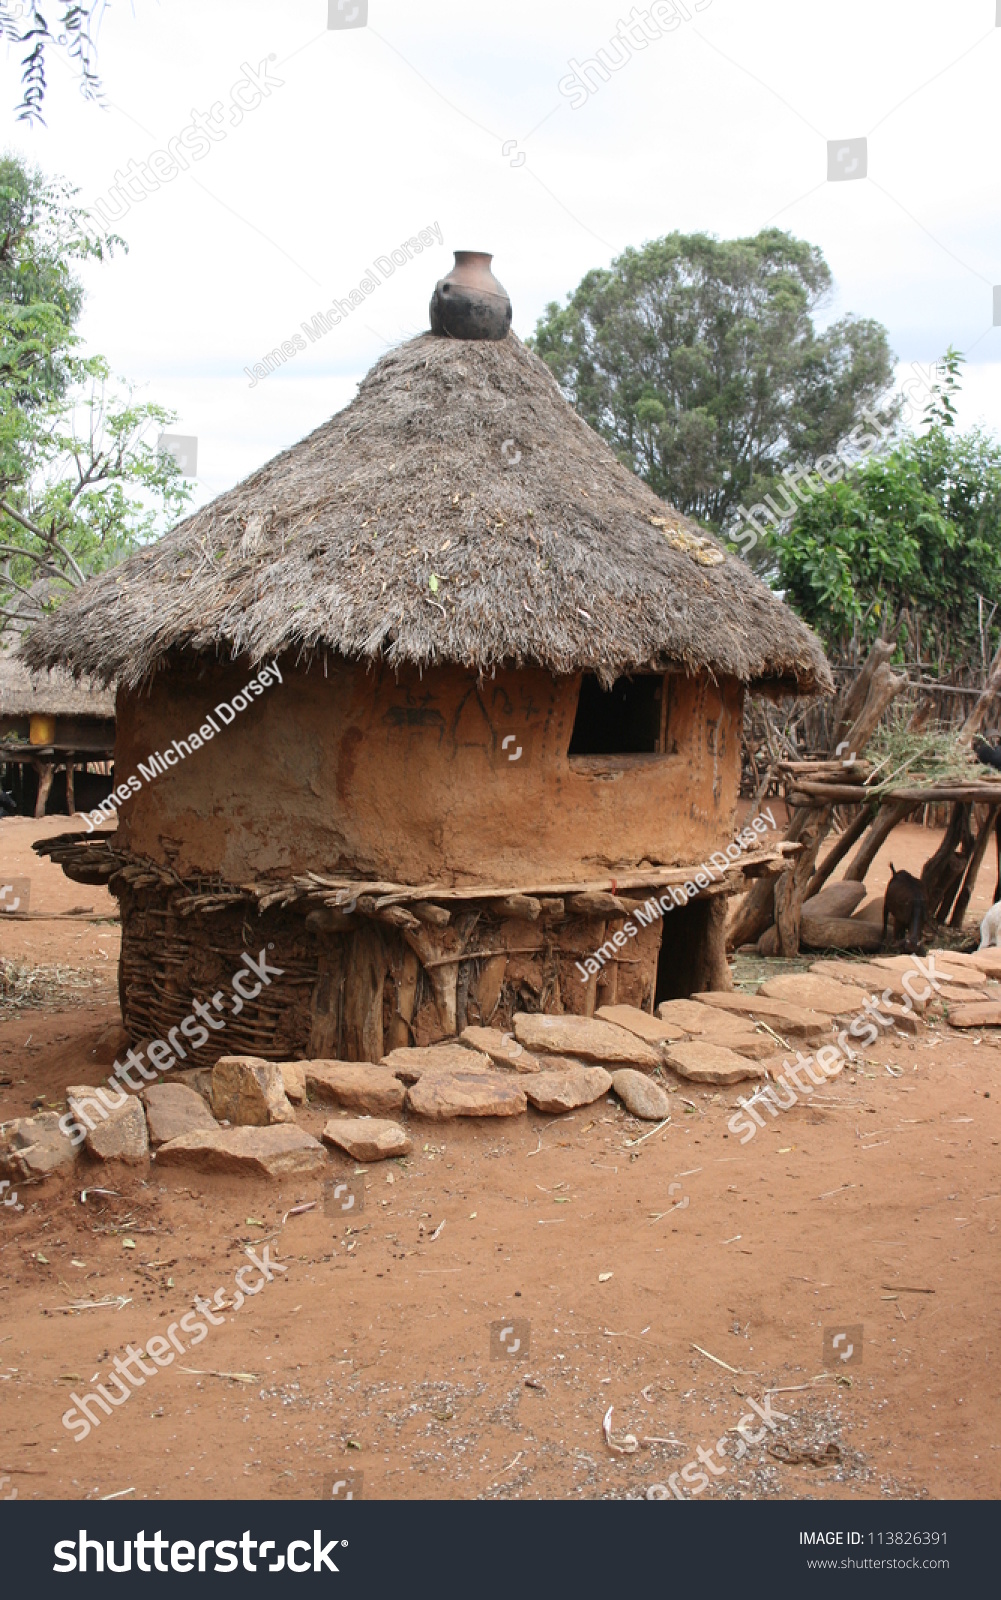 [Image: stock-photo-a-clay-and-thatched-roof-hut...826391.jpg]